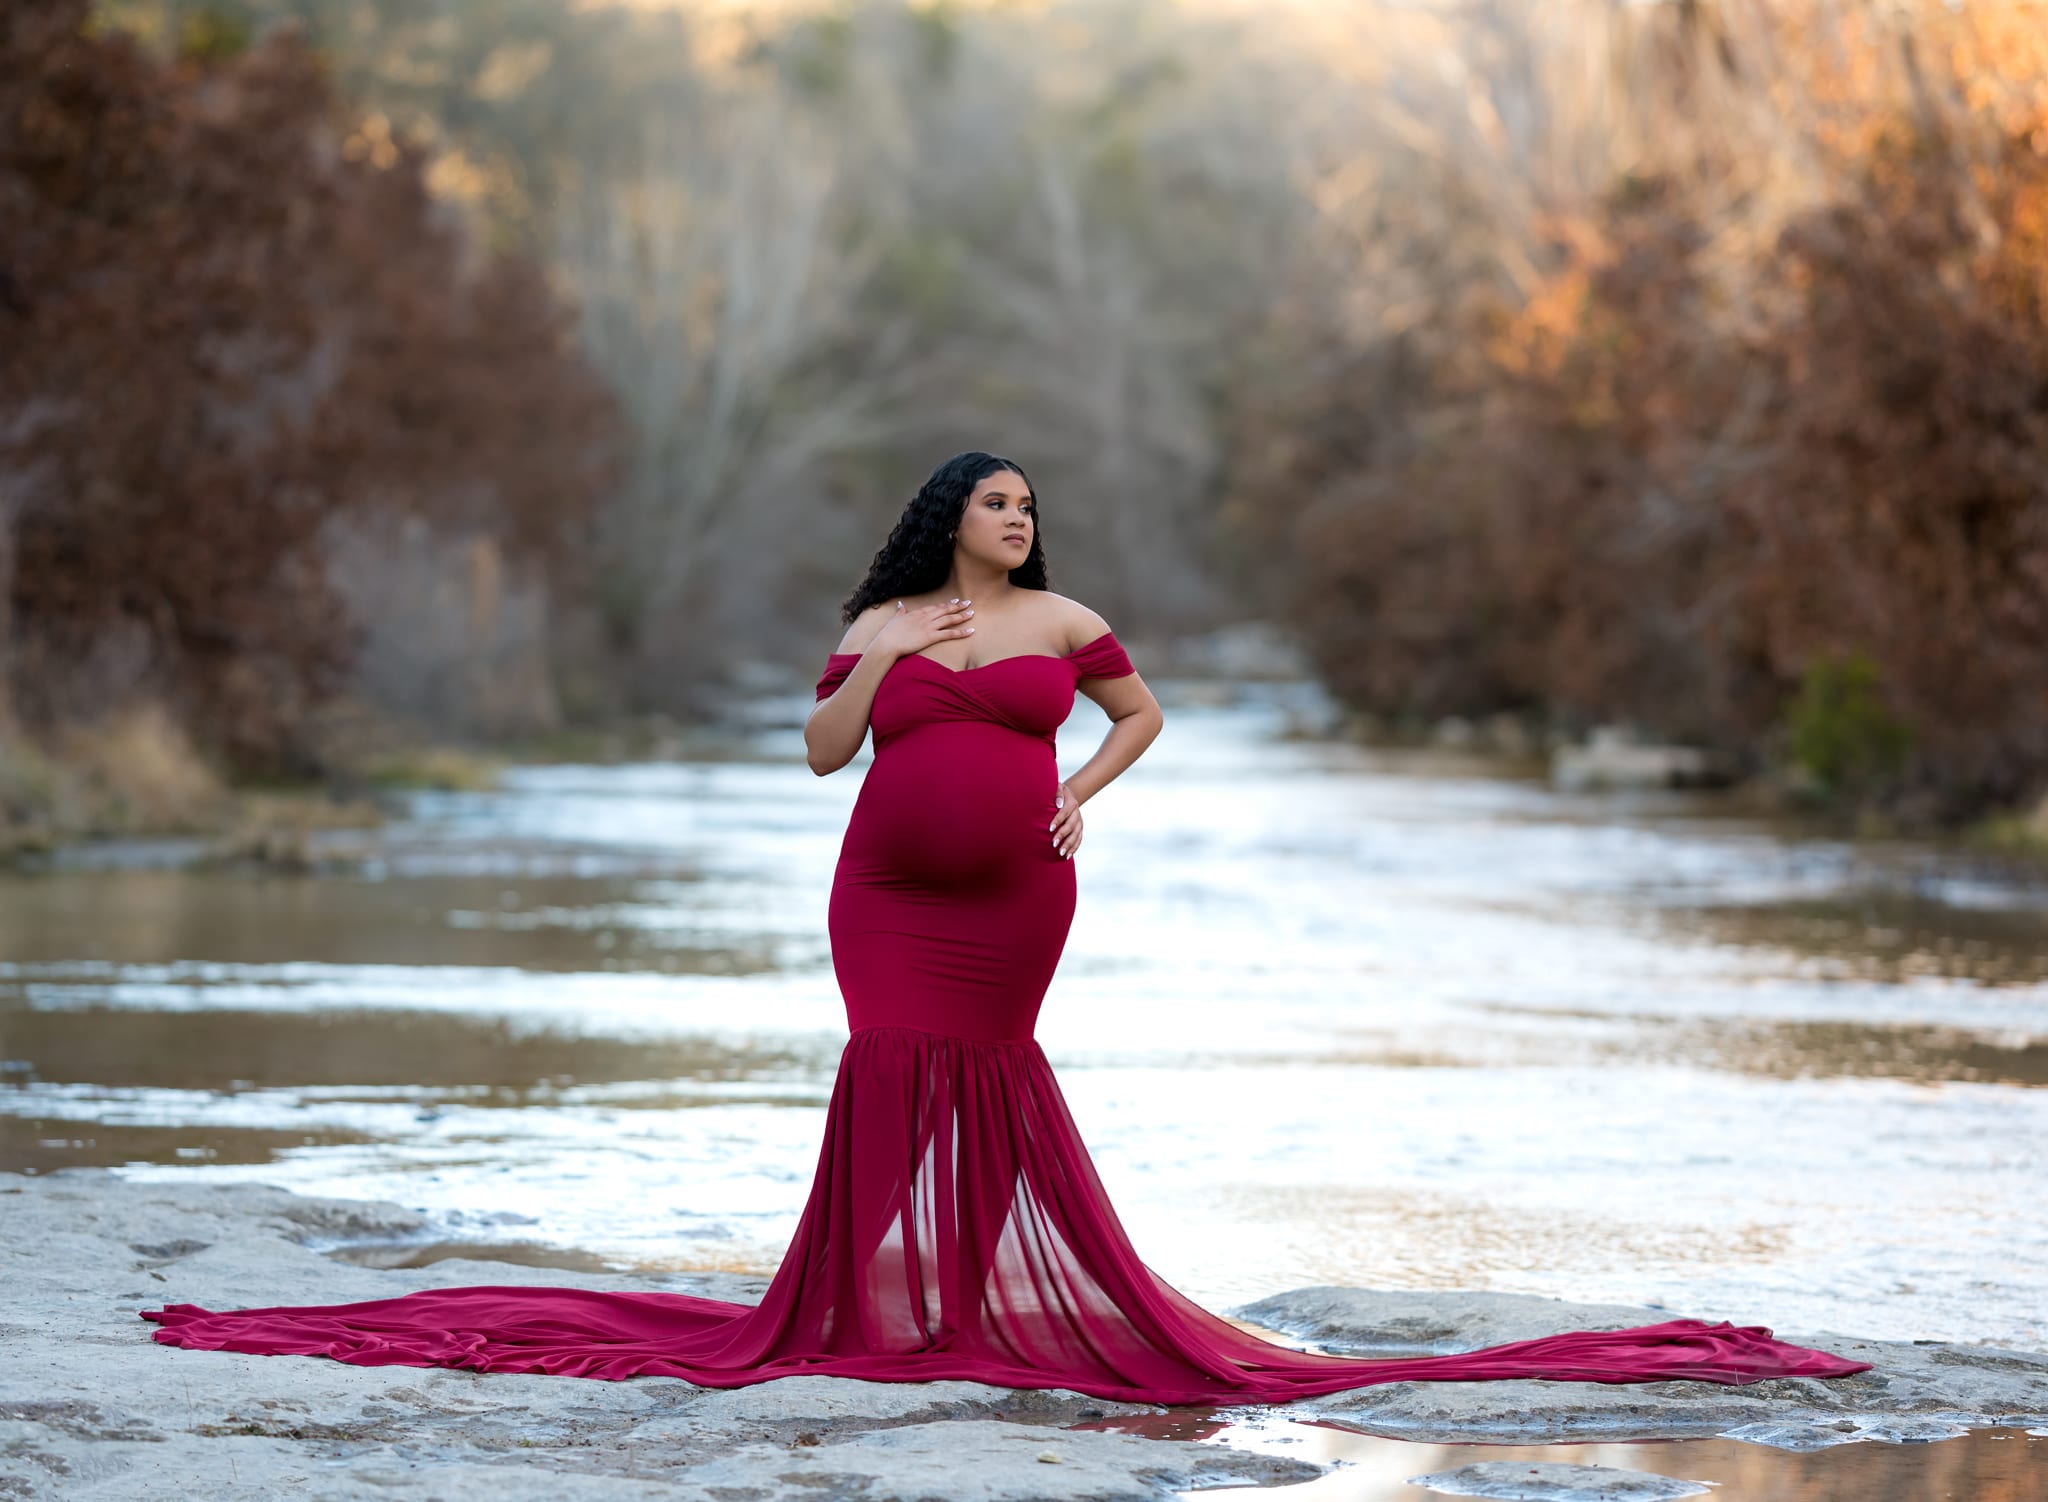 Bull creek maternity photos in a red dress